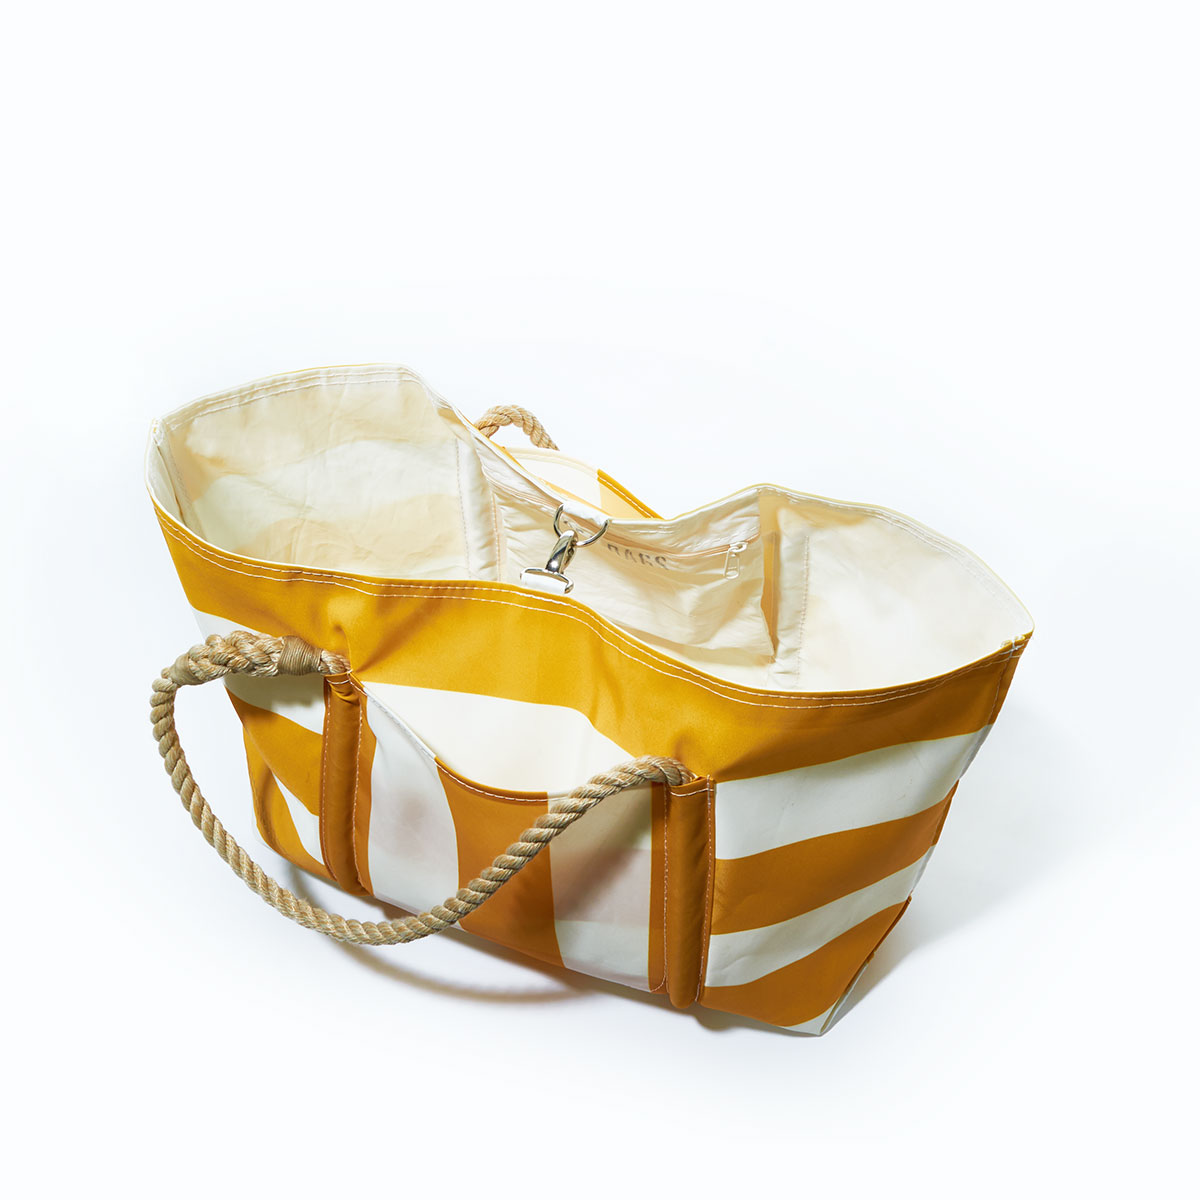 closed clasp: yellow and white plaid stripes adorn the front of a recycled sail cloth tote with hemp rope handles and a top metal clasp